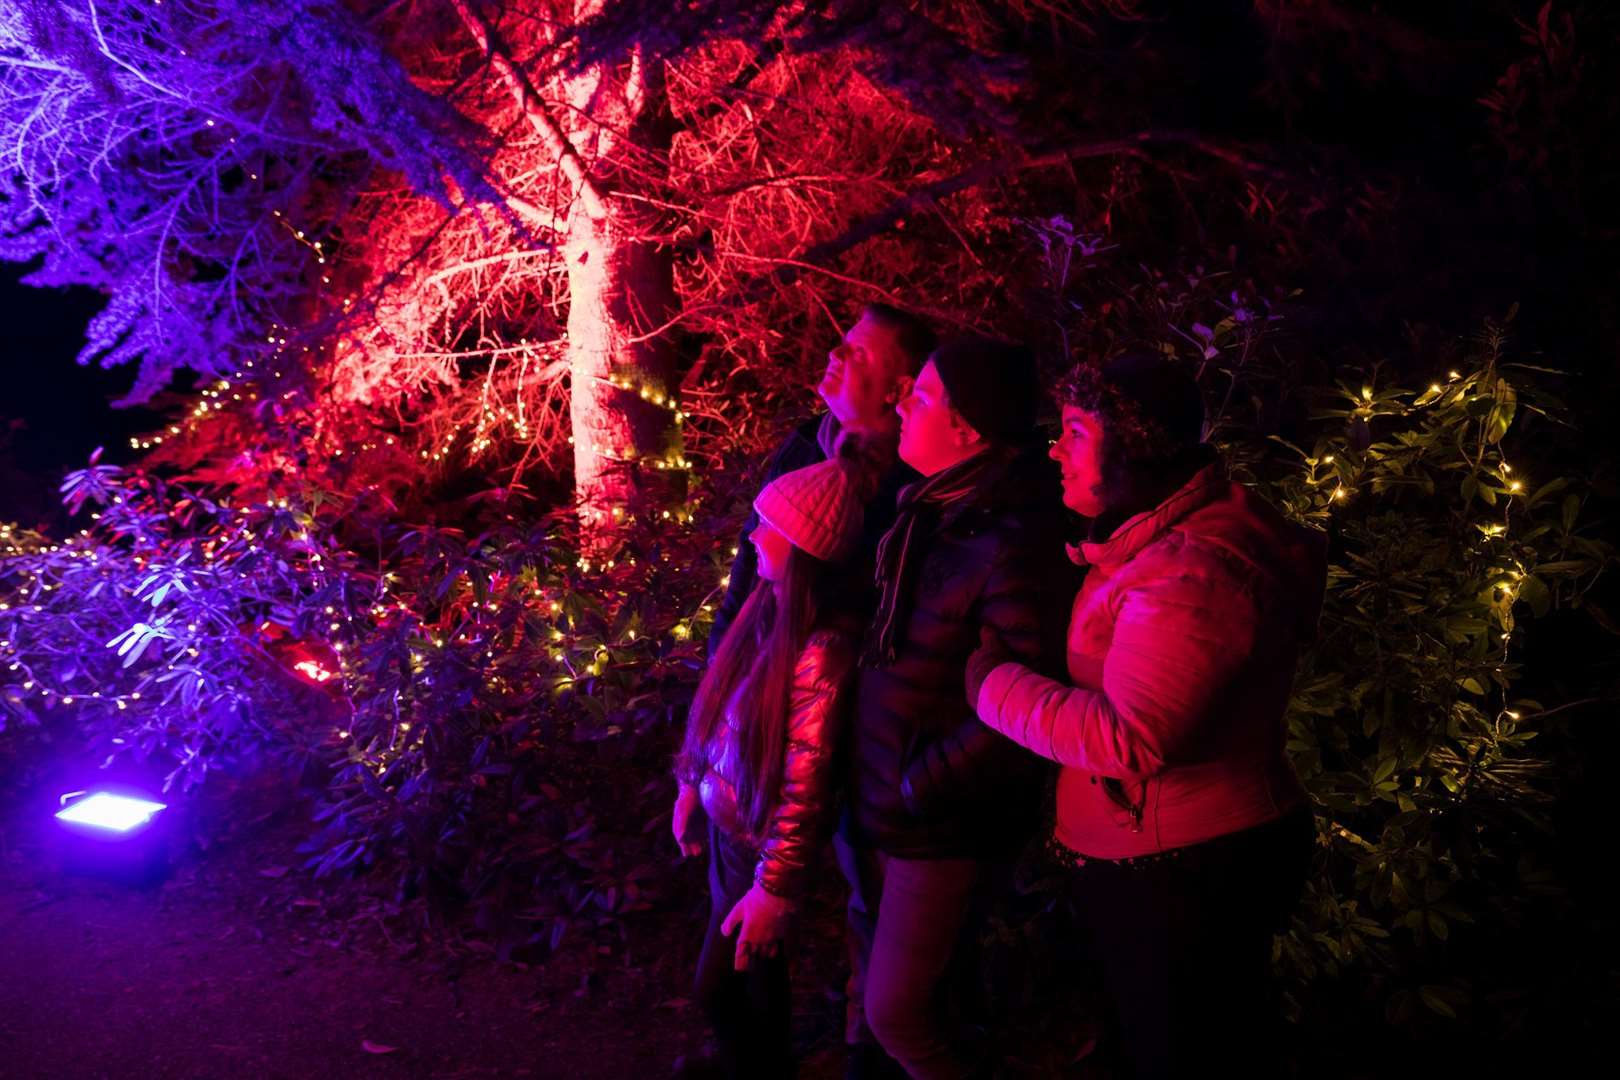 Audley End House's magical Christmas festival, Enchanted, returns this year